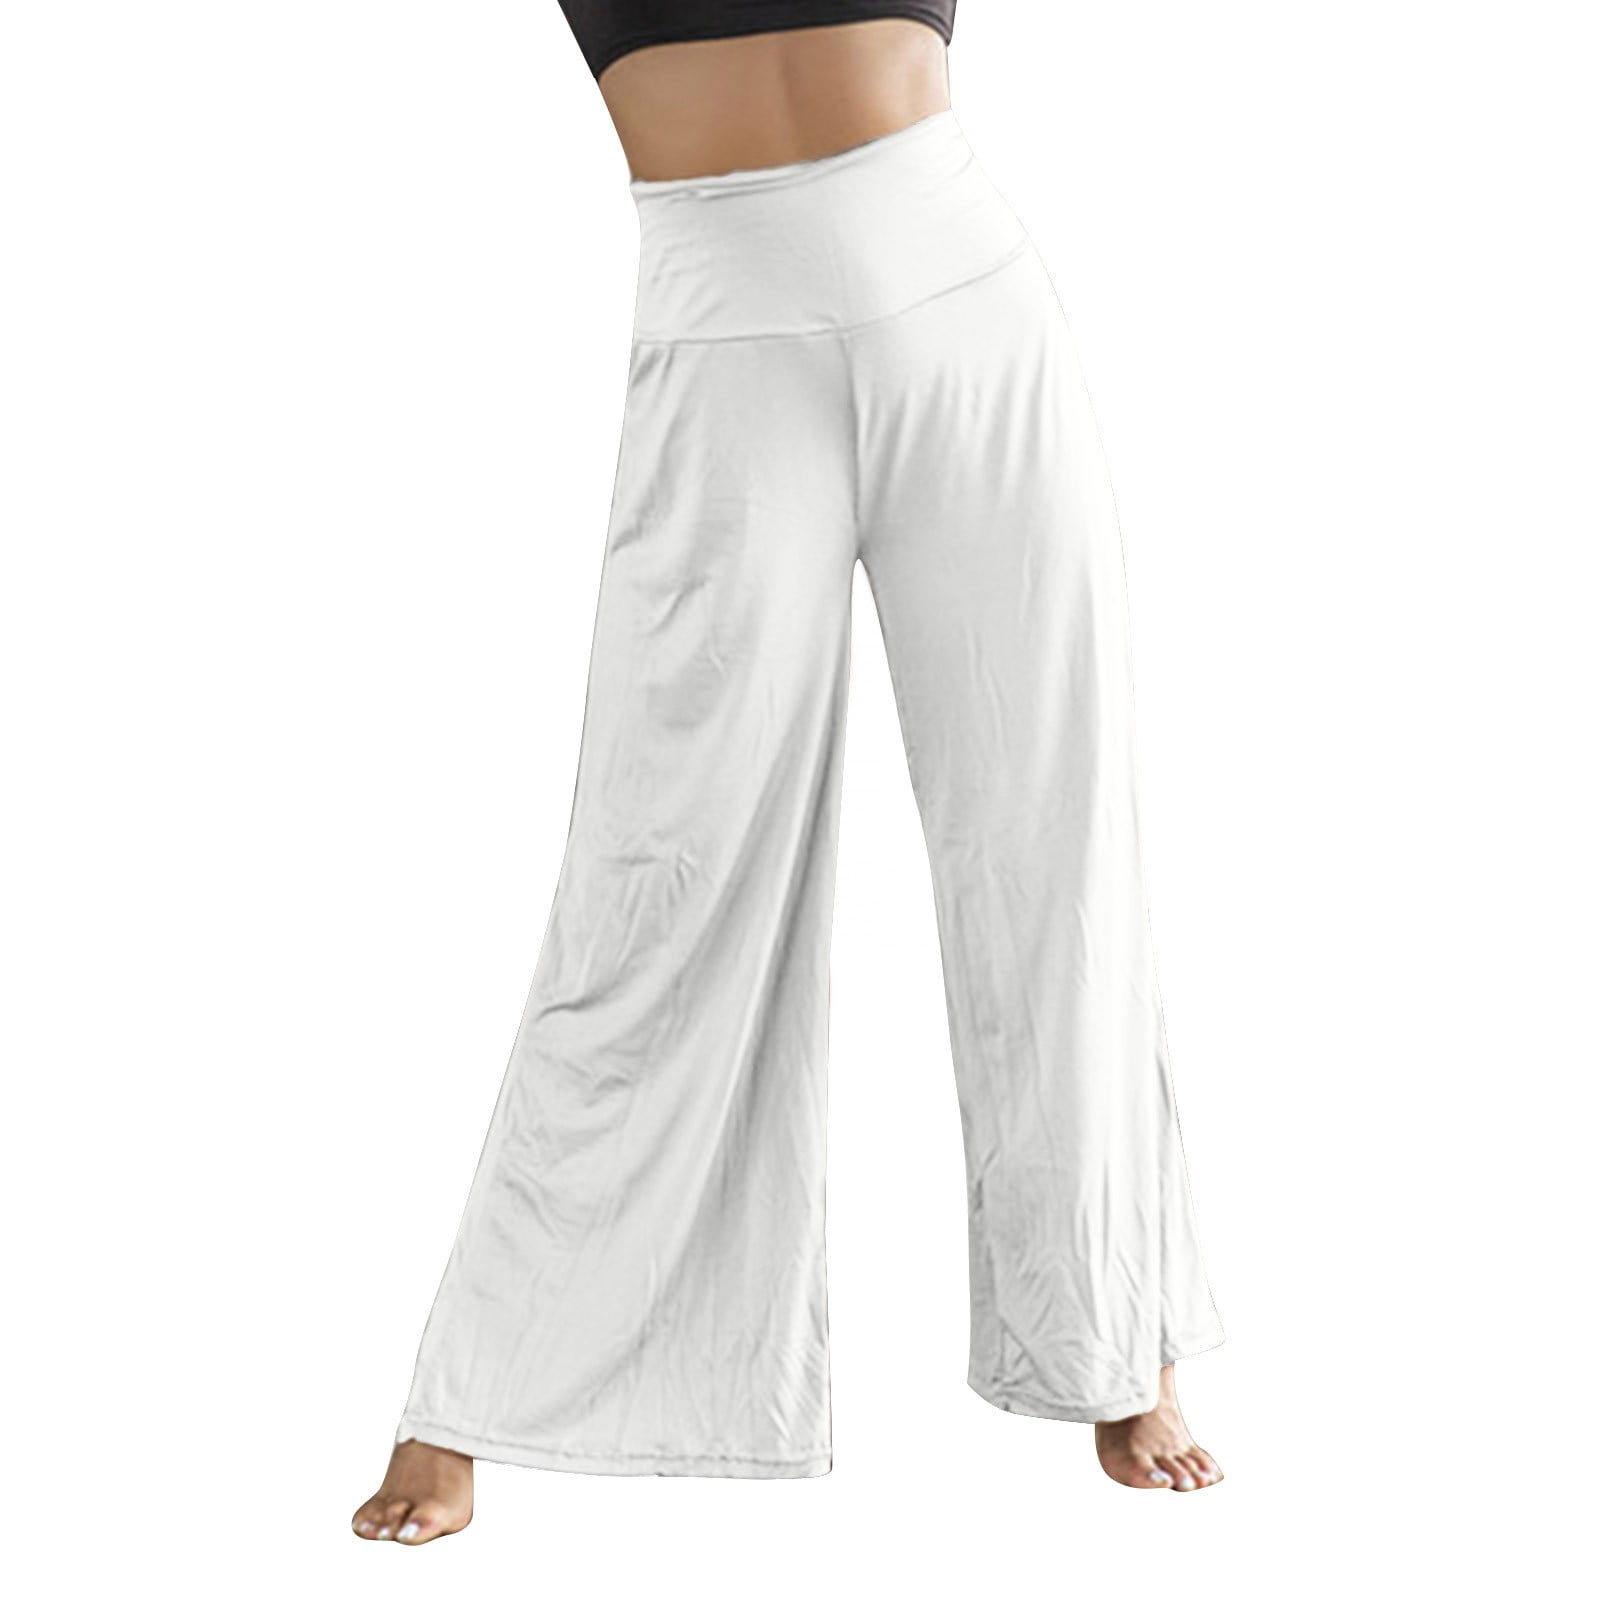 BSDHBS Yoga Clothes for Women Womens Casual High Waist Loose Solid